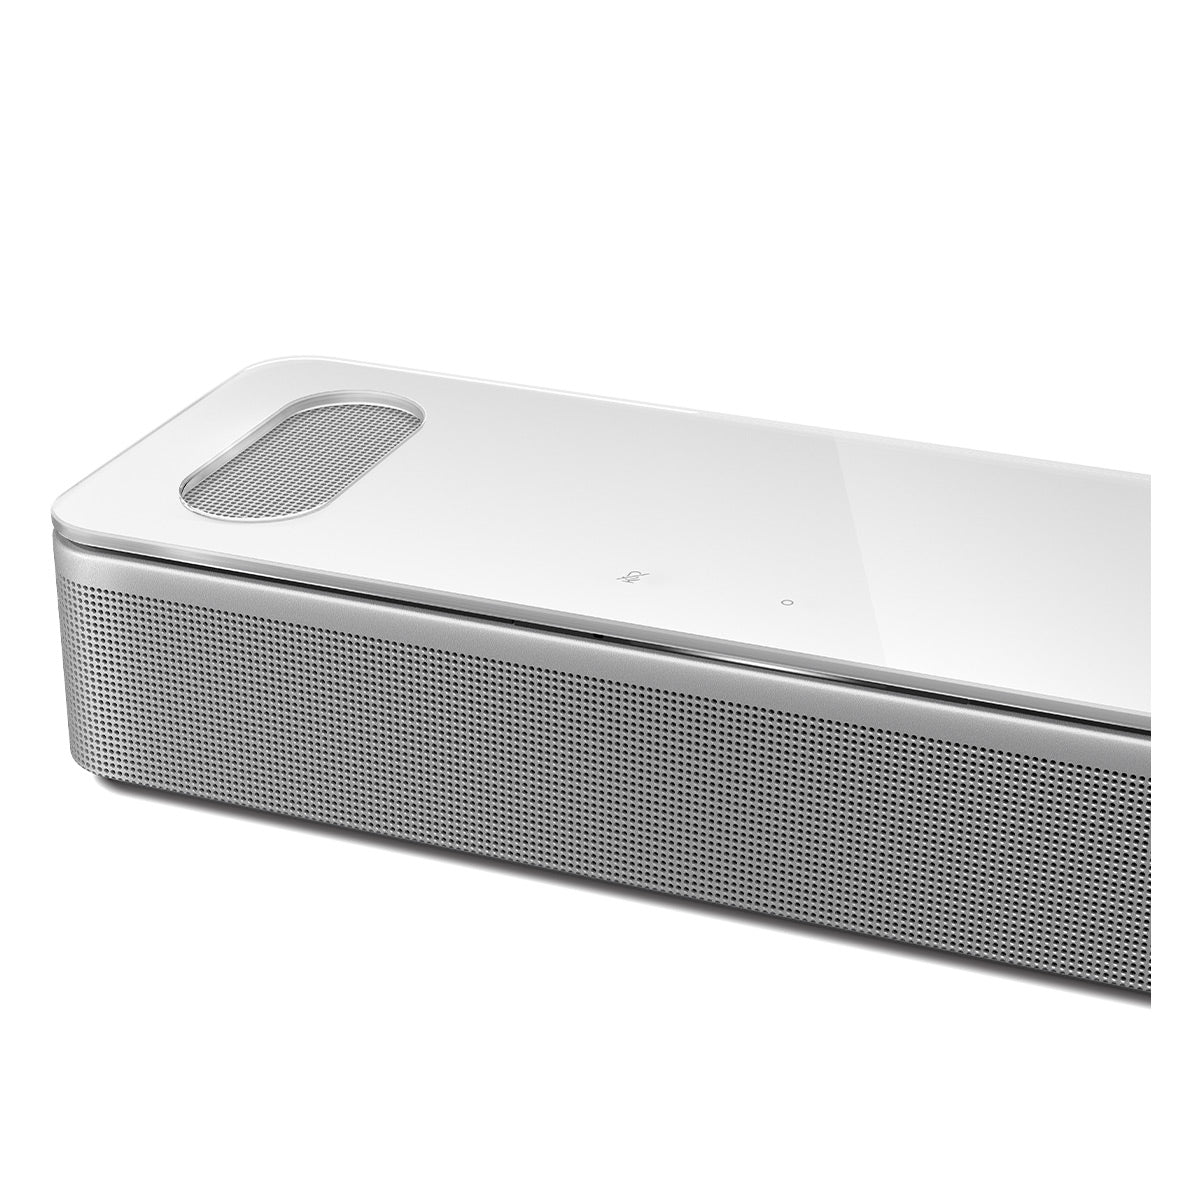 Bose Smart Soundbar Control Atmos Voice Wide Dolby and Google Assistant Stereo (White) Alexa World with 900 